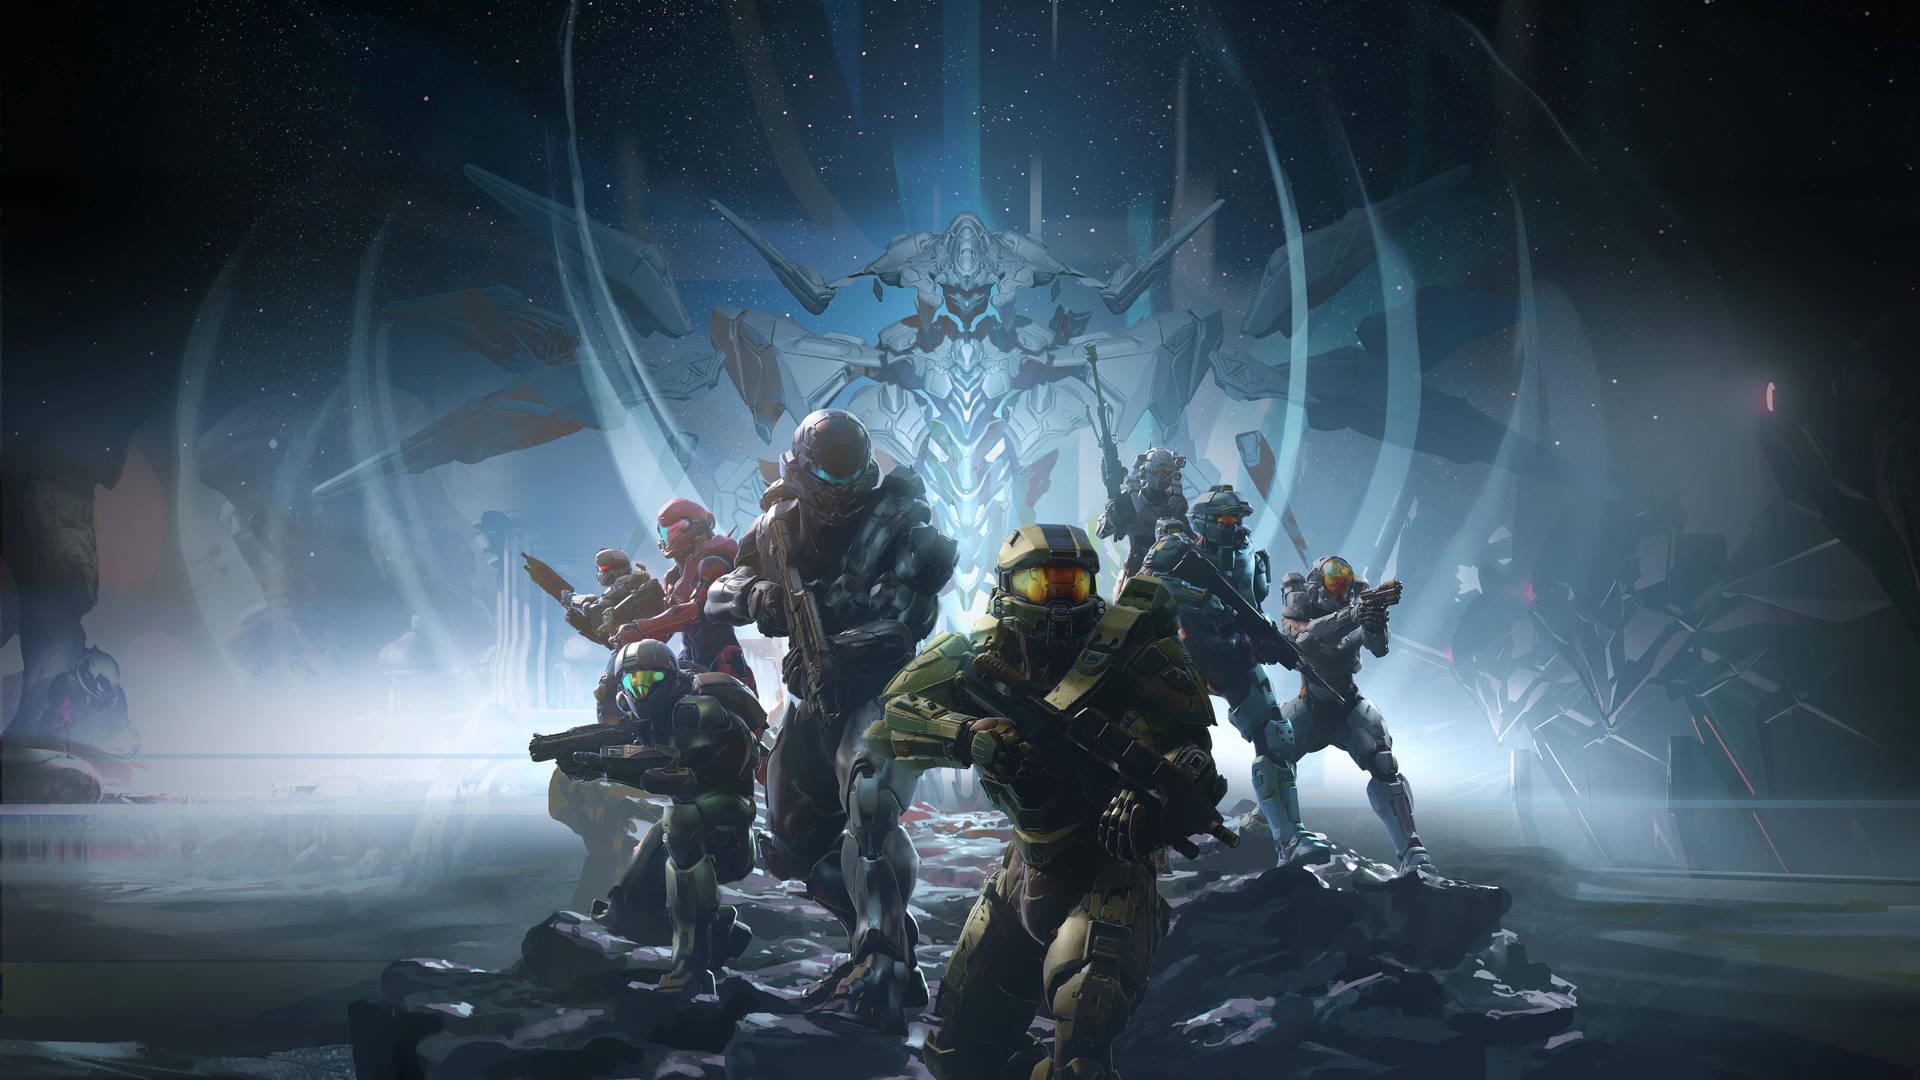 The Ultimate Guardians – Master Chief and Cortana of the Halo Franchise Wallpaper